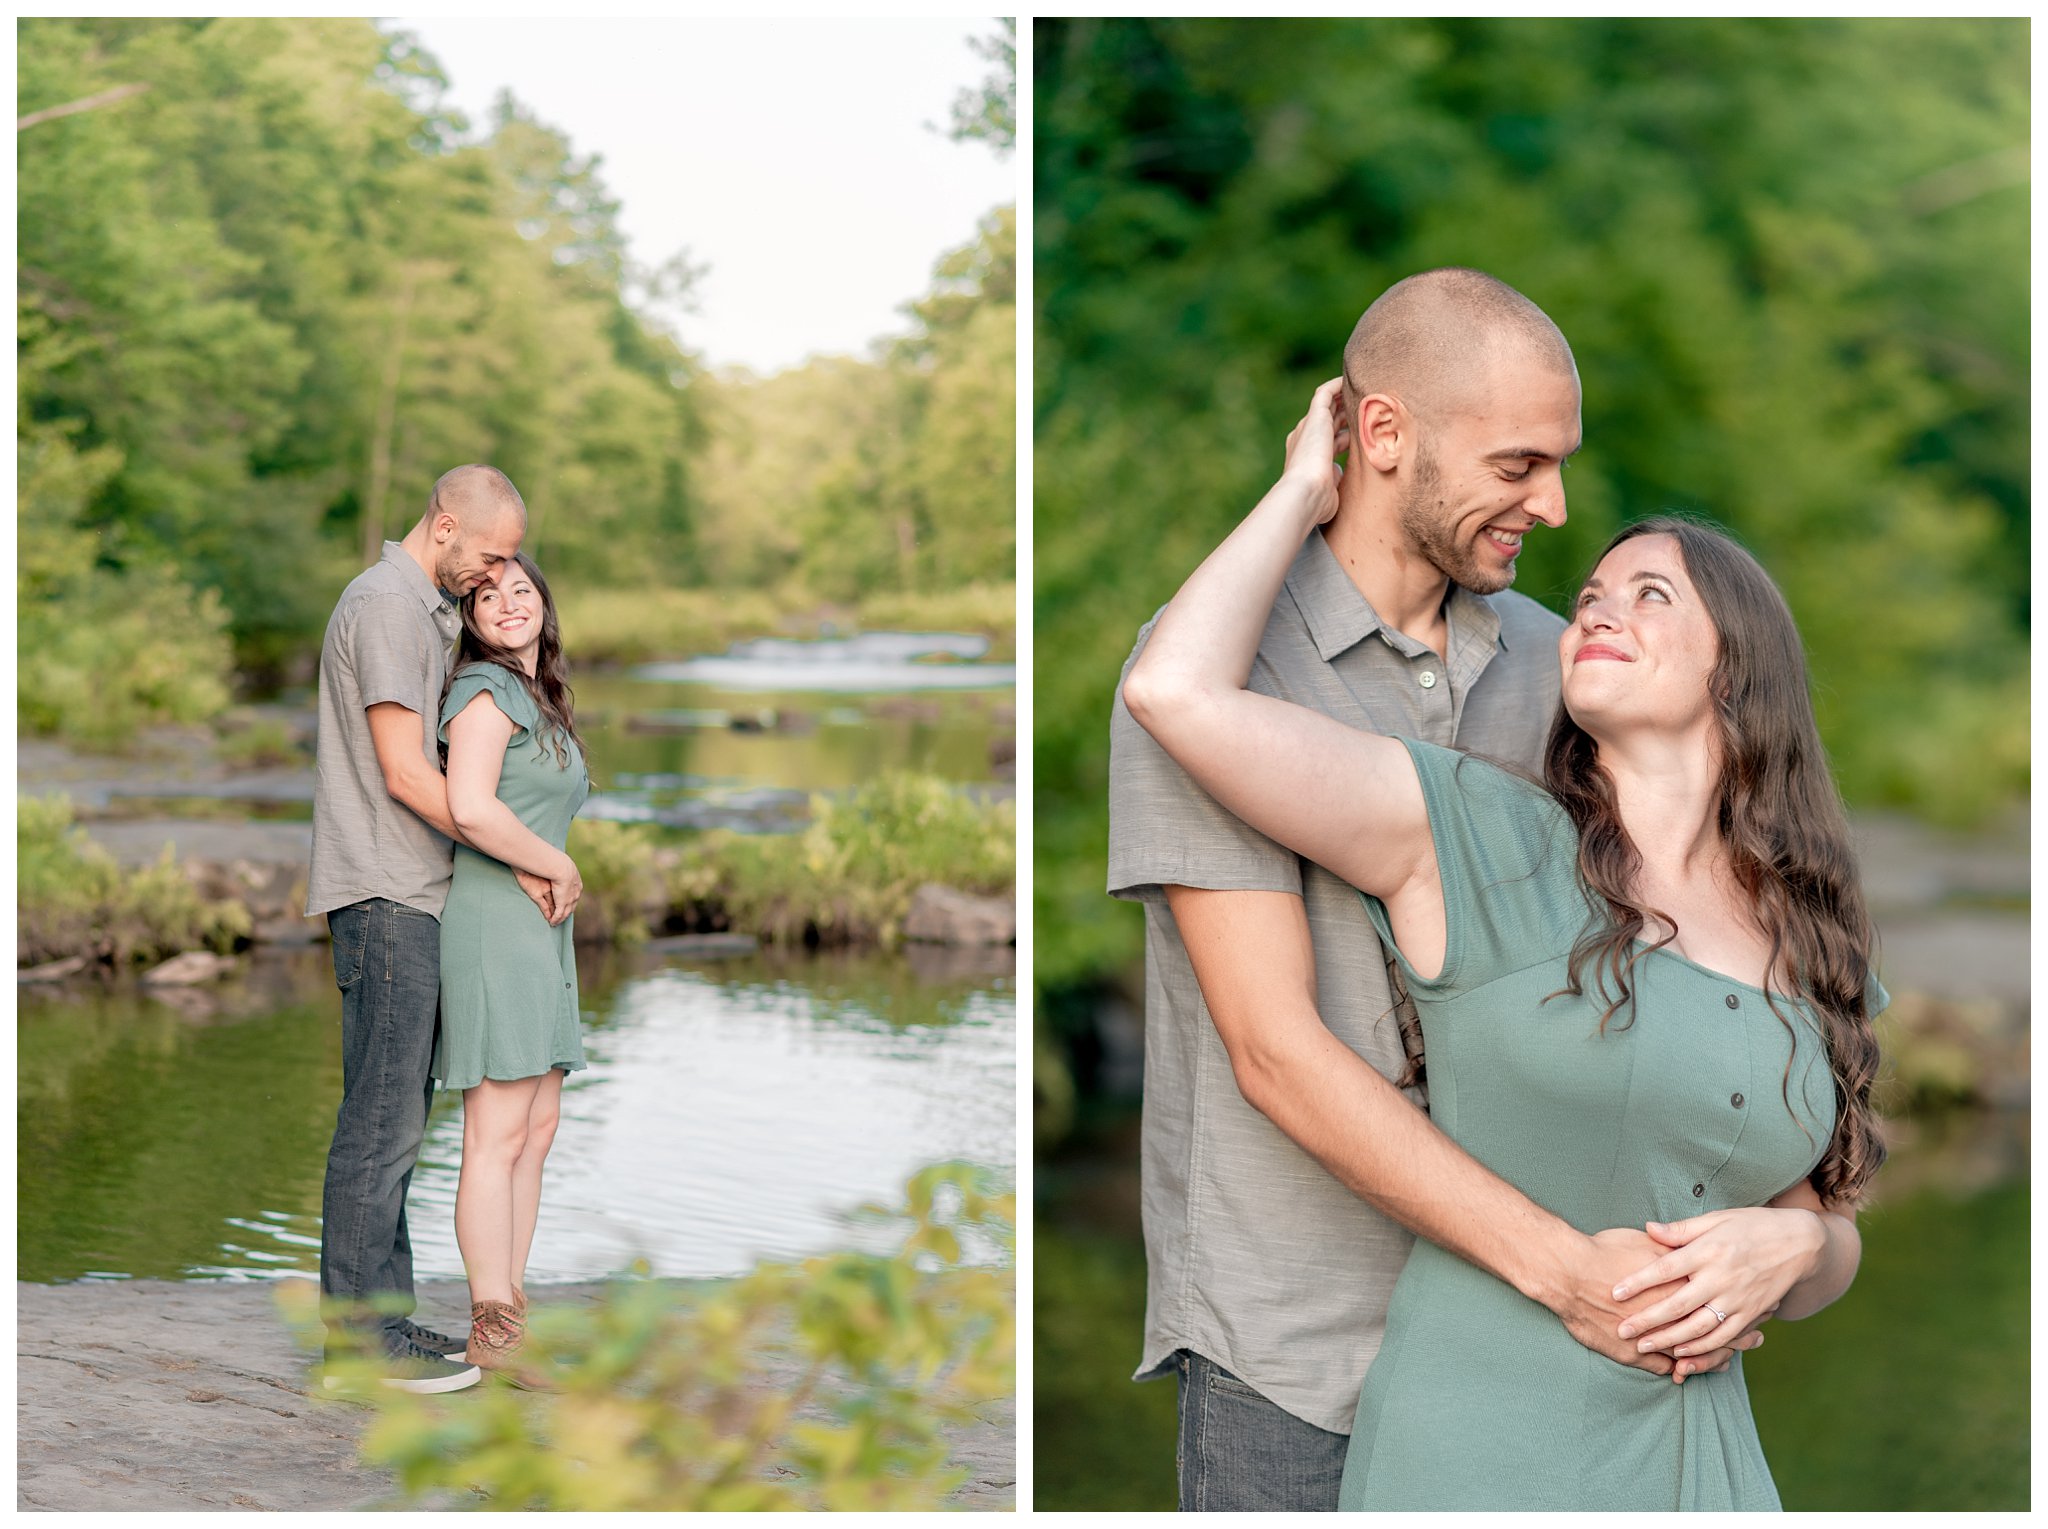 Salmon River Falls Engagement Session Joanna Young Photography_0026.jpg